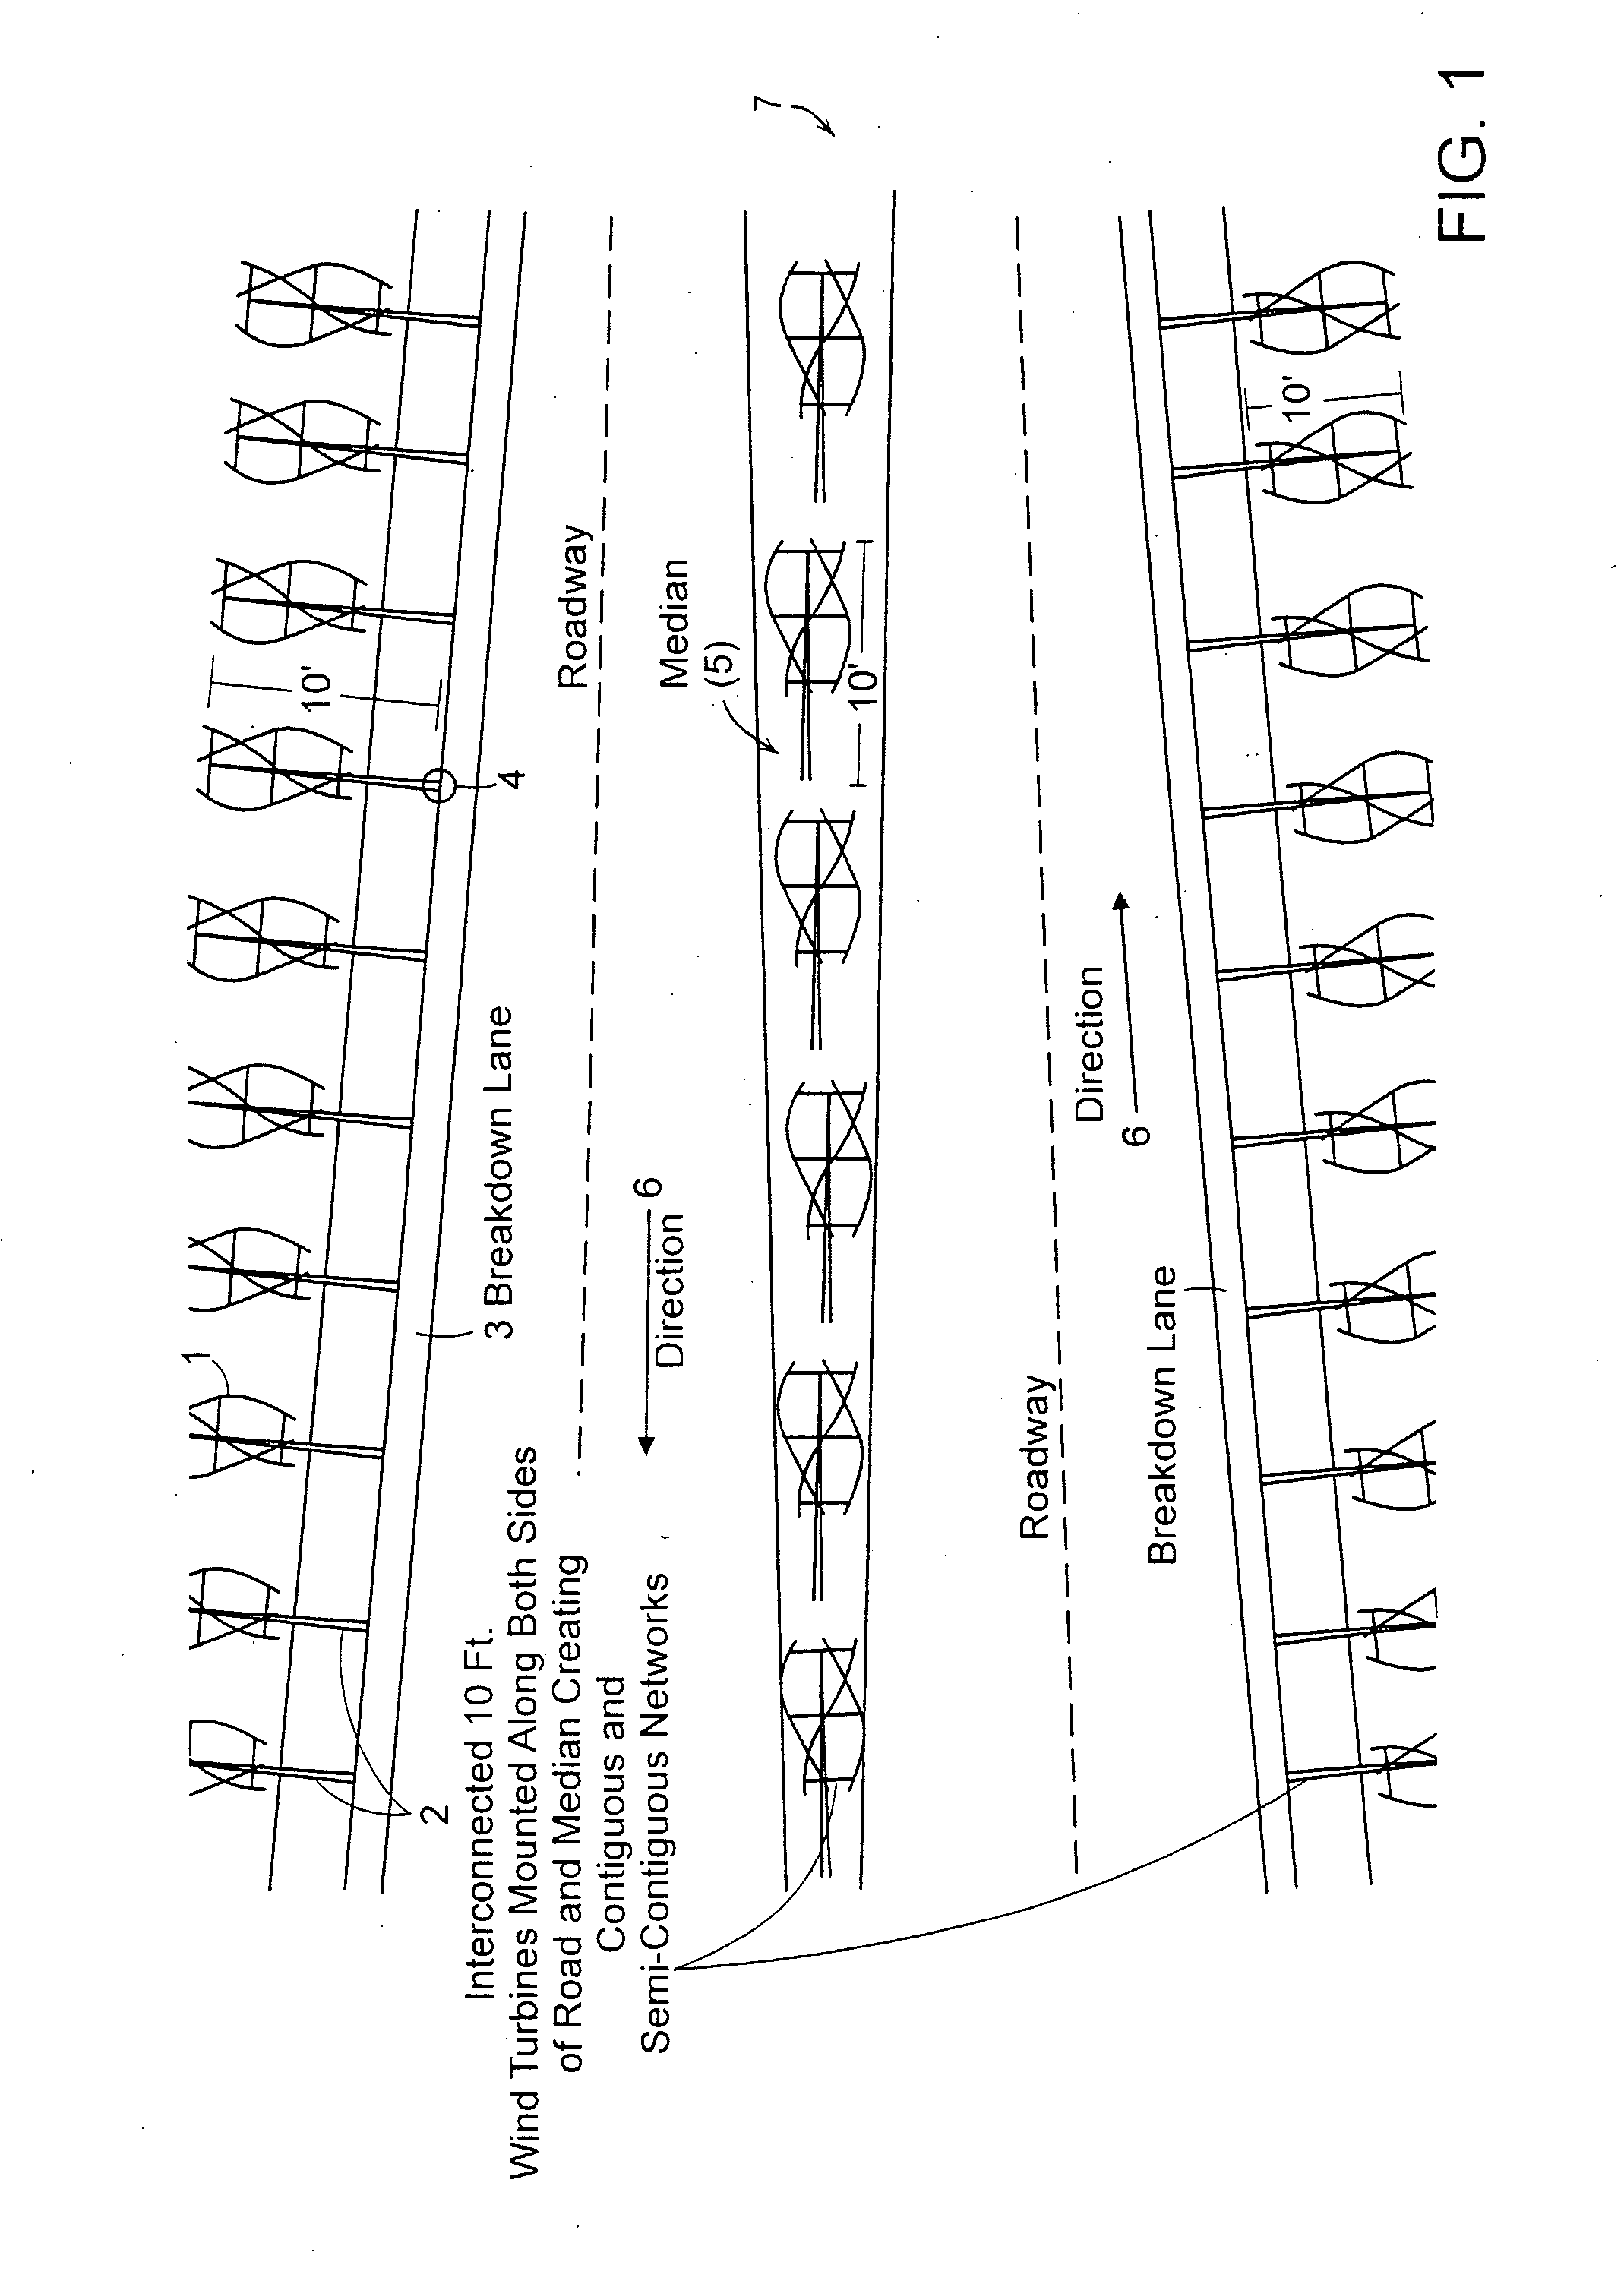 System and Method for Creating a Networked Vehicle Infrastructure Distribution Platform of Small Wind Gathering Devices